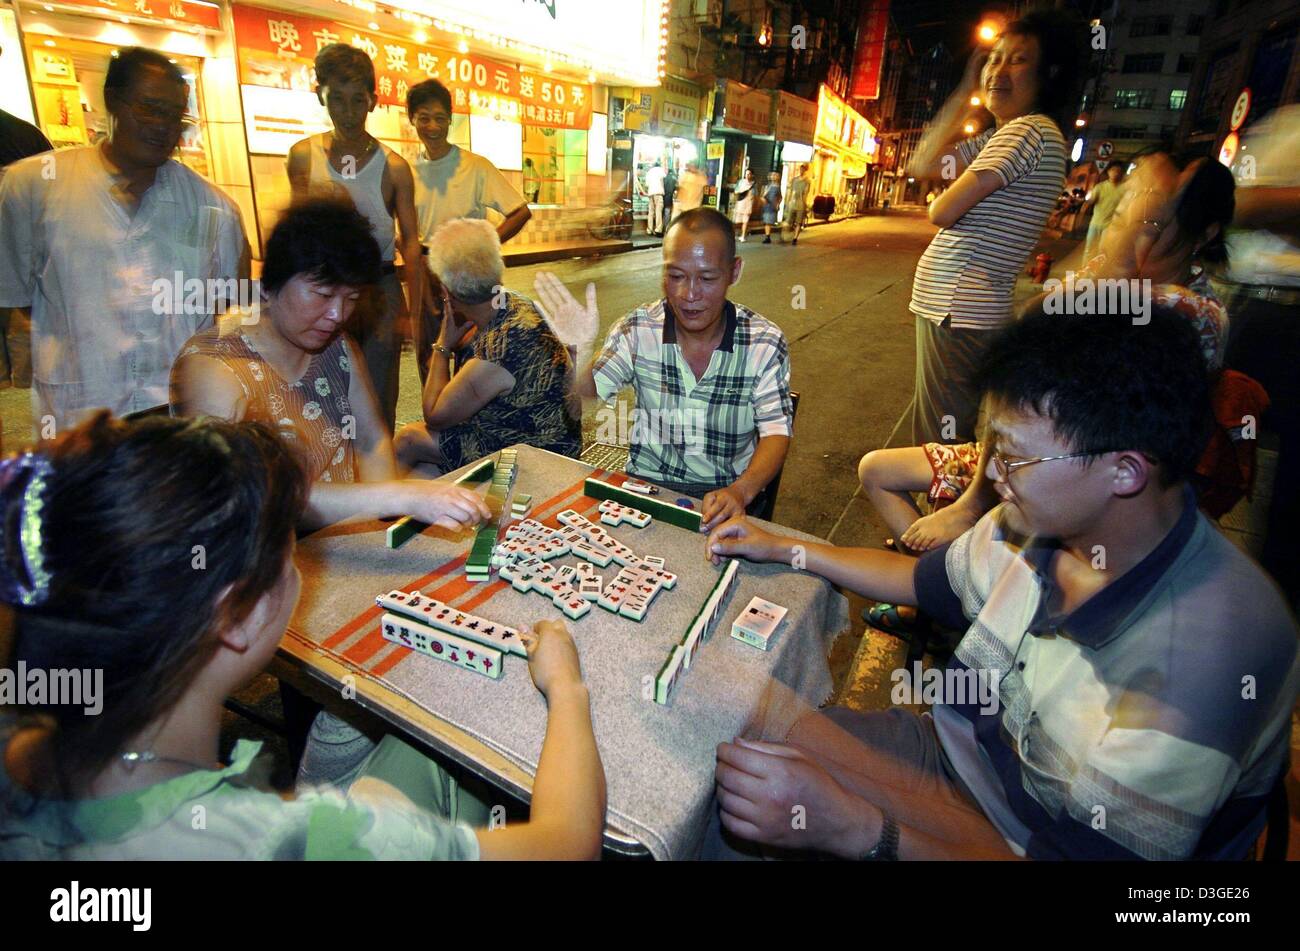 (dpa files) - People play the traditional Mah-Jongg game on a makeshift table in a street in central Shanghai, China, 16 July 2004. The Grand Prix of China will be held on the newly built race track for the first time in Shanghai on Sunday, 26 September 2004. Stock Photo